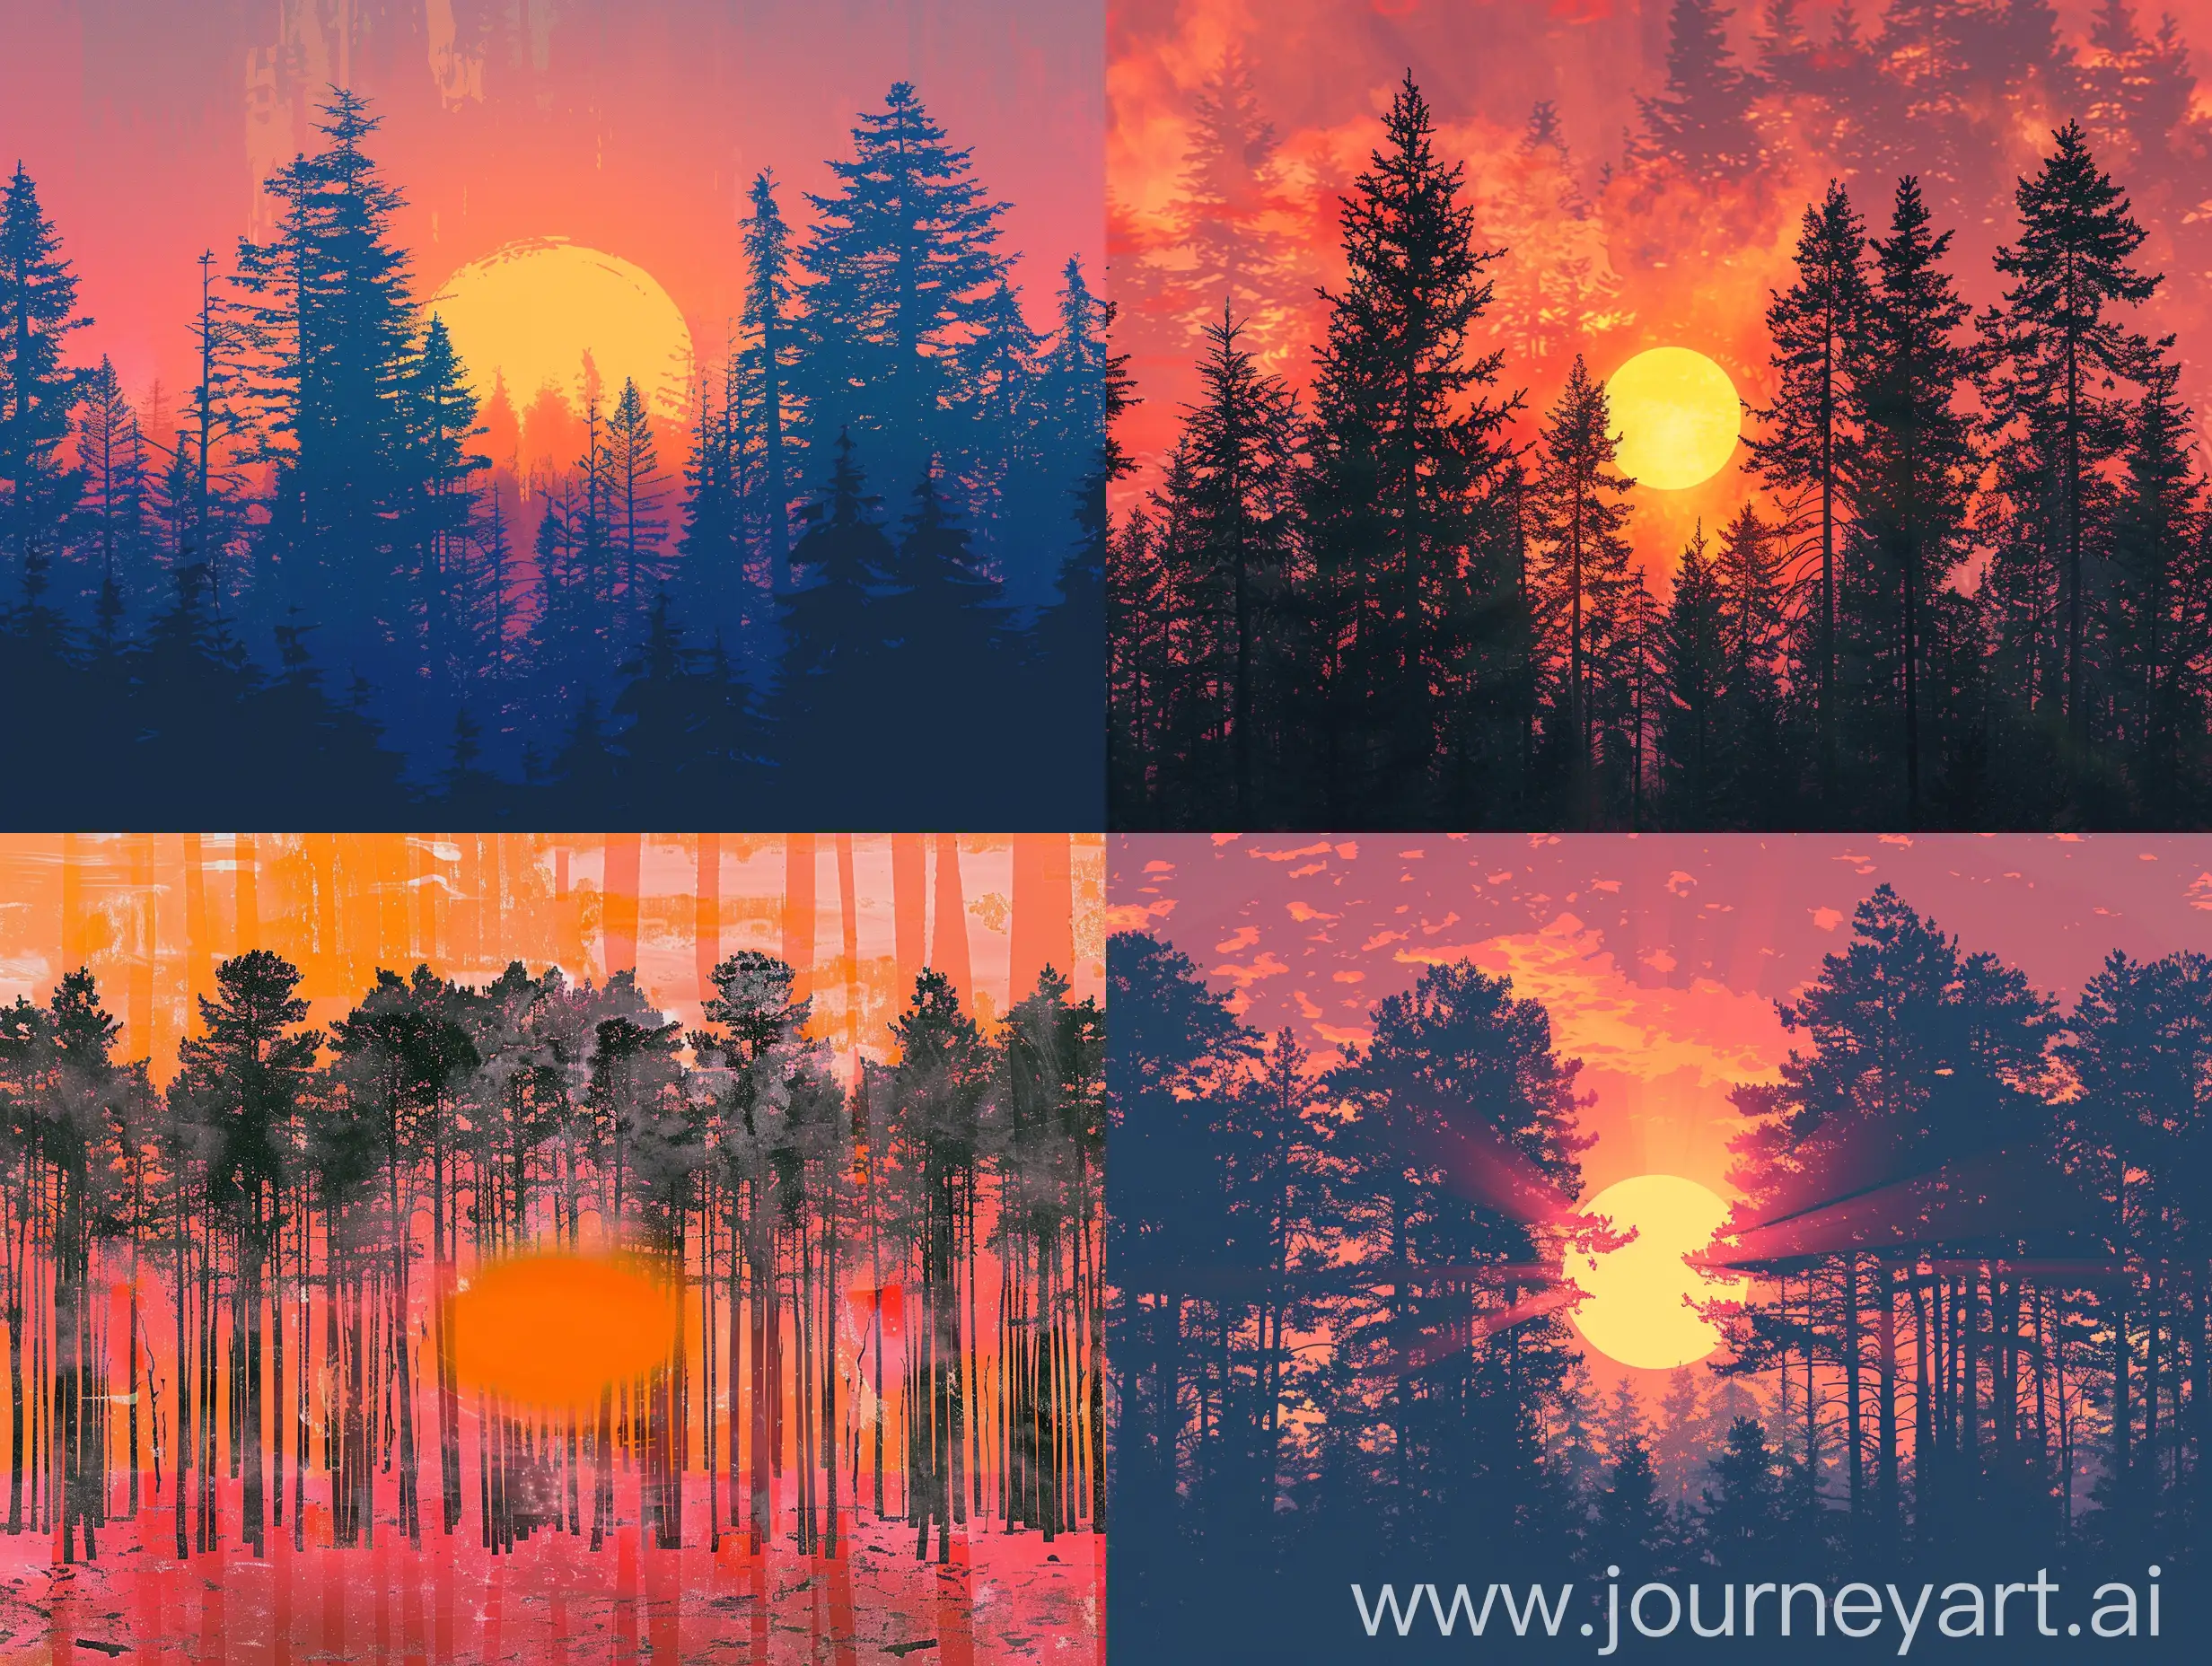 55th-Anniversary-Collage-Background-Pine-Forest-Sunset-Celebration